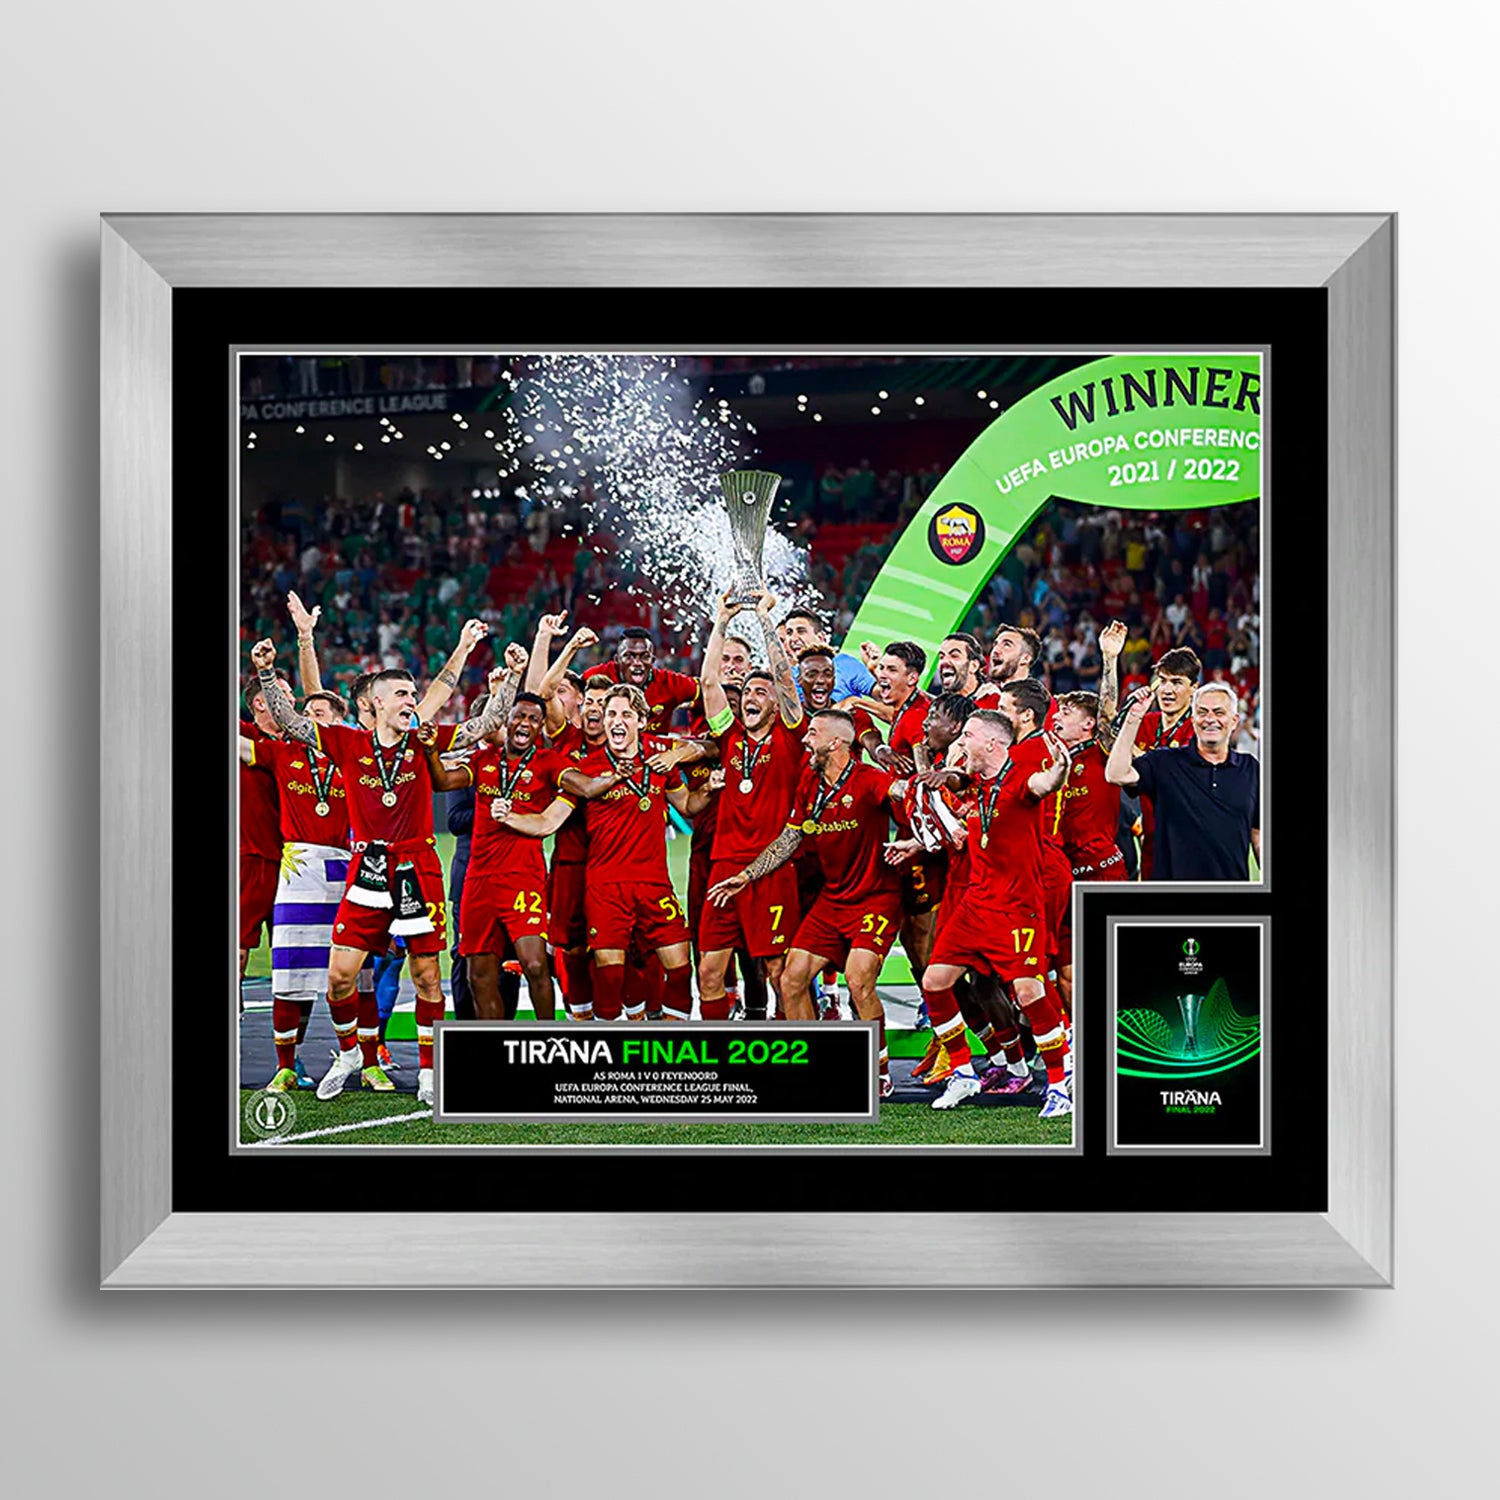 Tirana Winners Trophy Lift Framed and Mounted 20x16 - Conference League Final UEFA Club Competitions Online Store